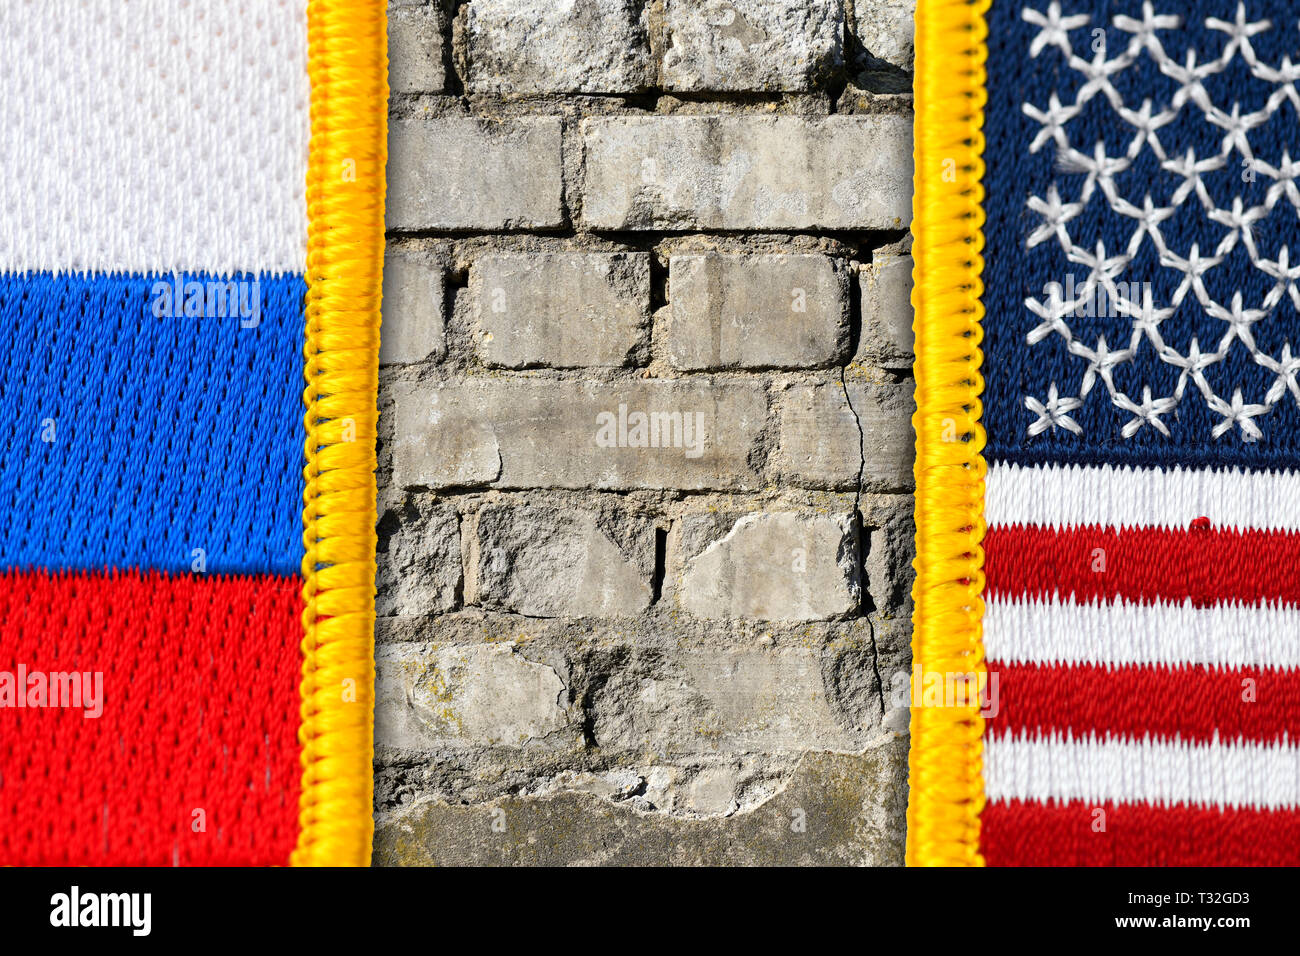 More poorly between flags of the USA and Russia, the USA finish INF contract, Mauer zwischen Fahnen von USA und Russland, USA beenden INF-Vertrag Stock Photo